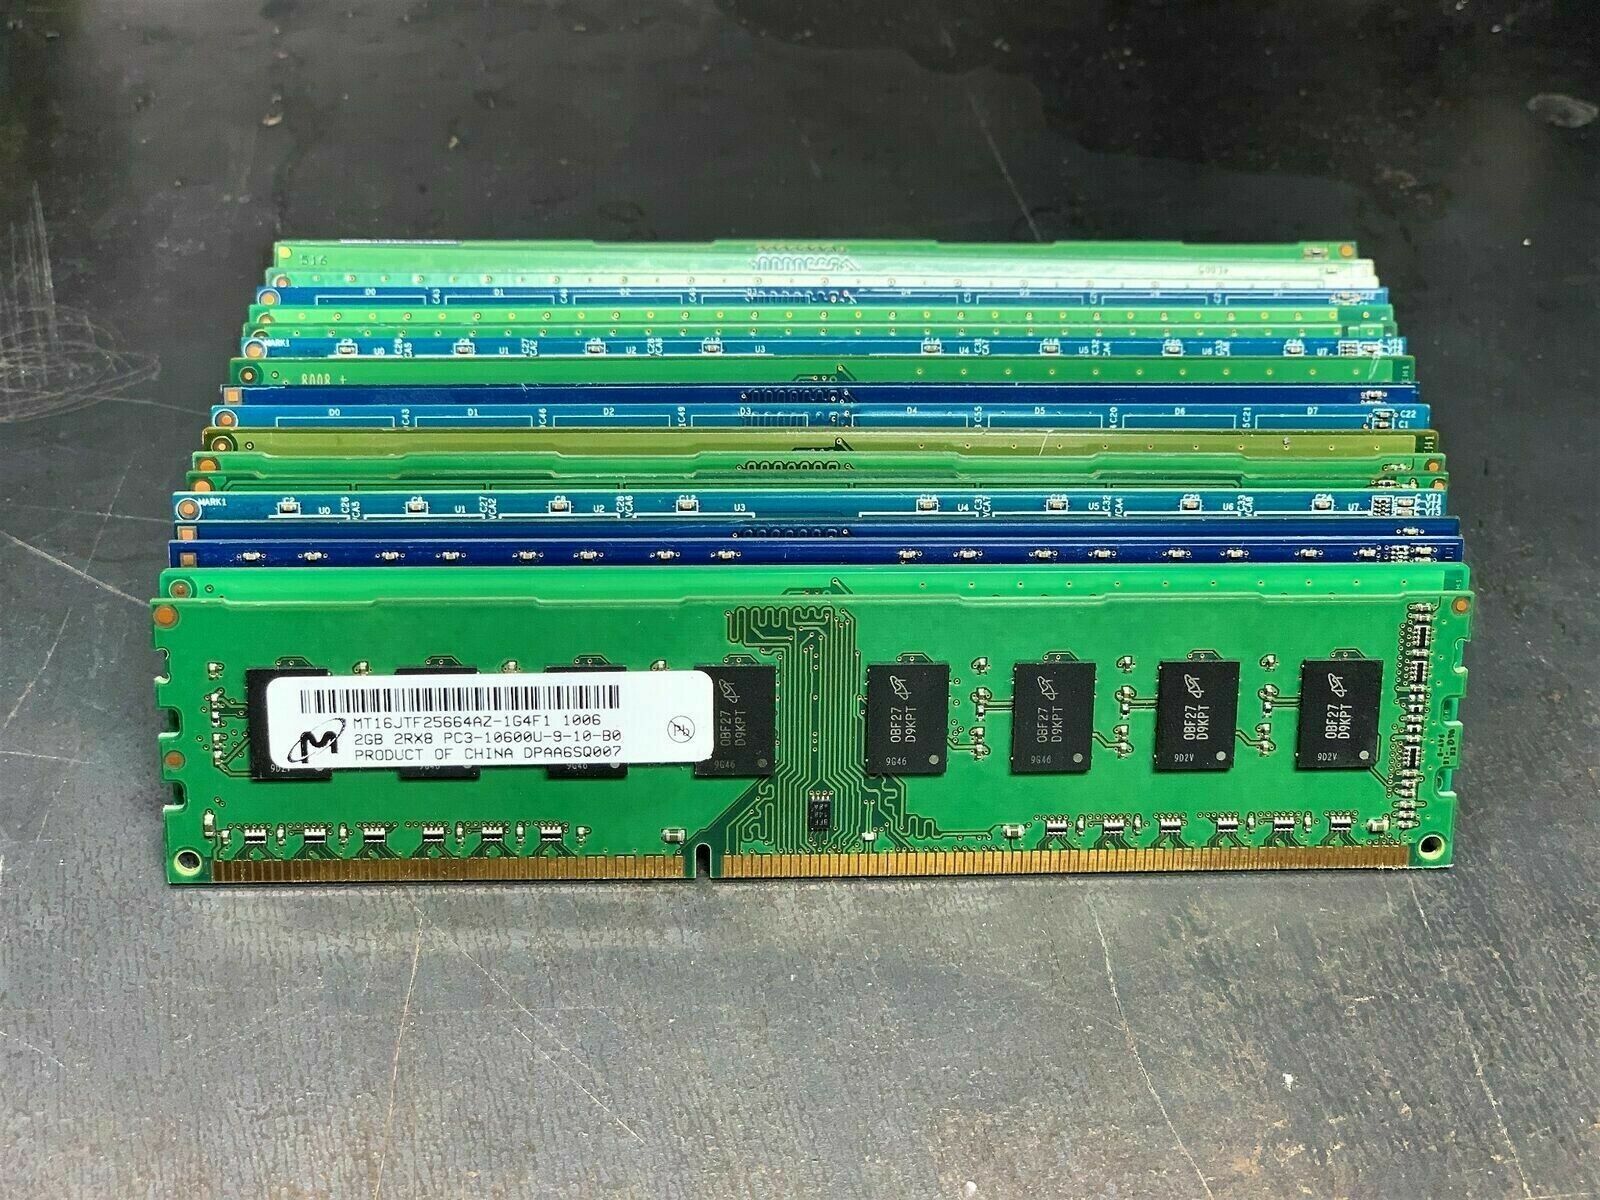 (Lot of 20) 2GB DDR3 PC3-10600 1333MHz Desktop RAM Memory Mix Major Brand Not specified Does not apply